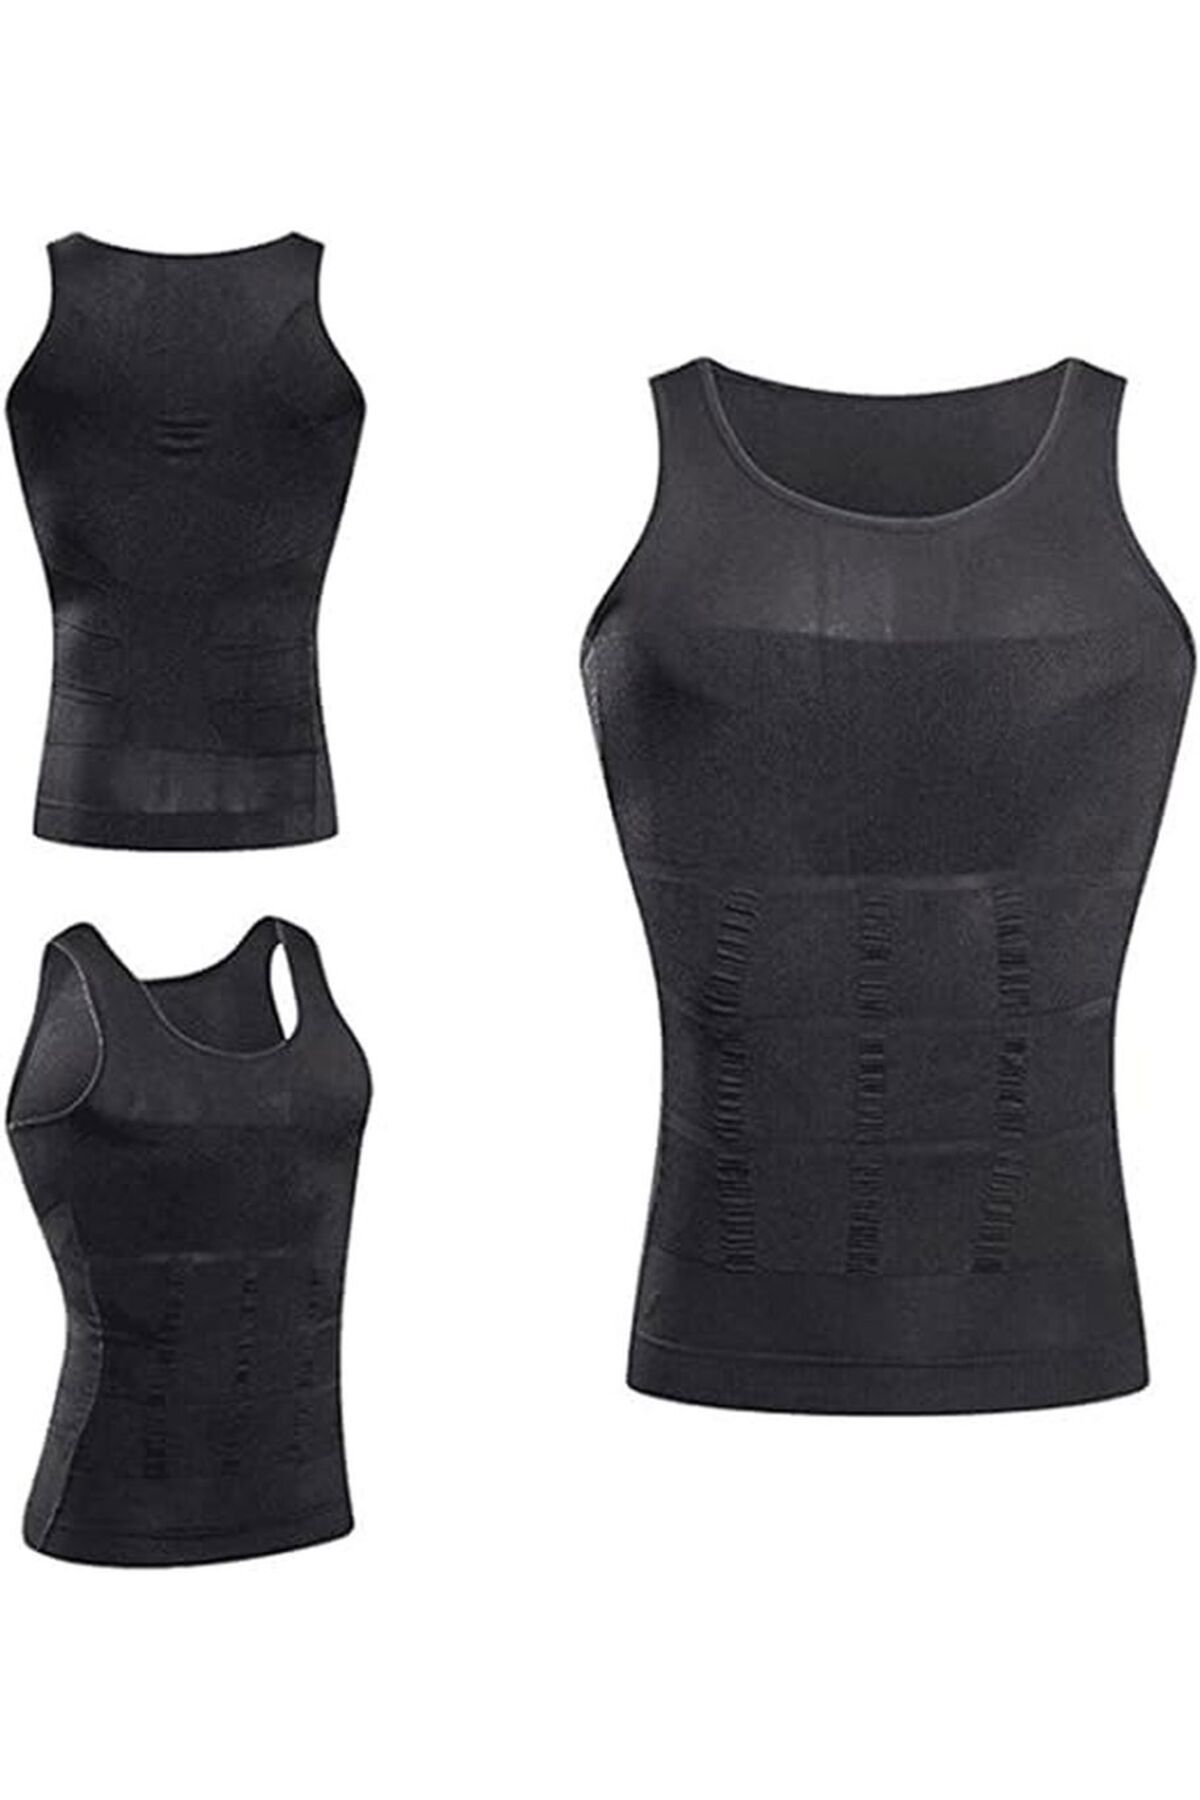 Uniquerrs Men's Body Shaper Chest and Belly Shaper Firming Breathable  Athlete Corset - Trendyol